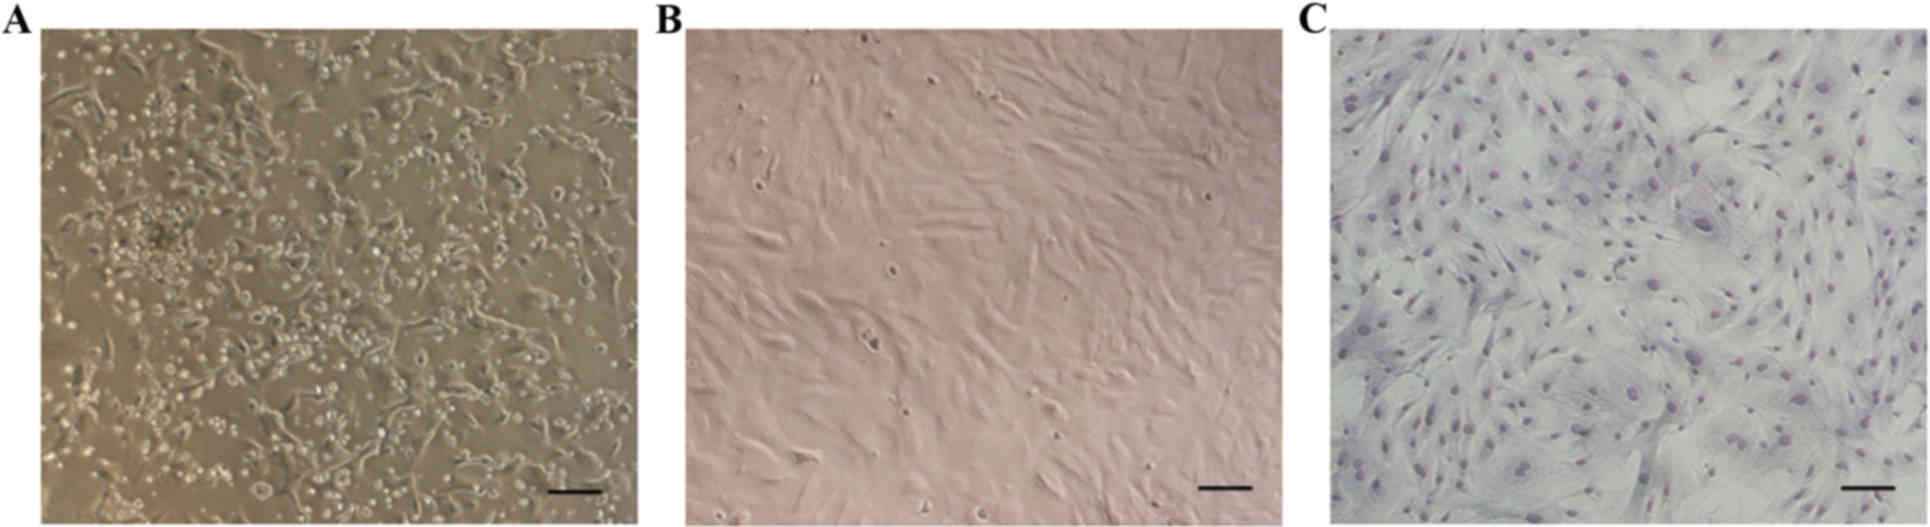 a k hardwood flooring ltd of effects of hsya on the proliferation and apoptosis of mscs exposed regarding a the majority of cells were adherent following 3 days of primary culture b third generation mscs exhibited a fibroblast or spindle like morphology